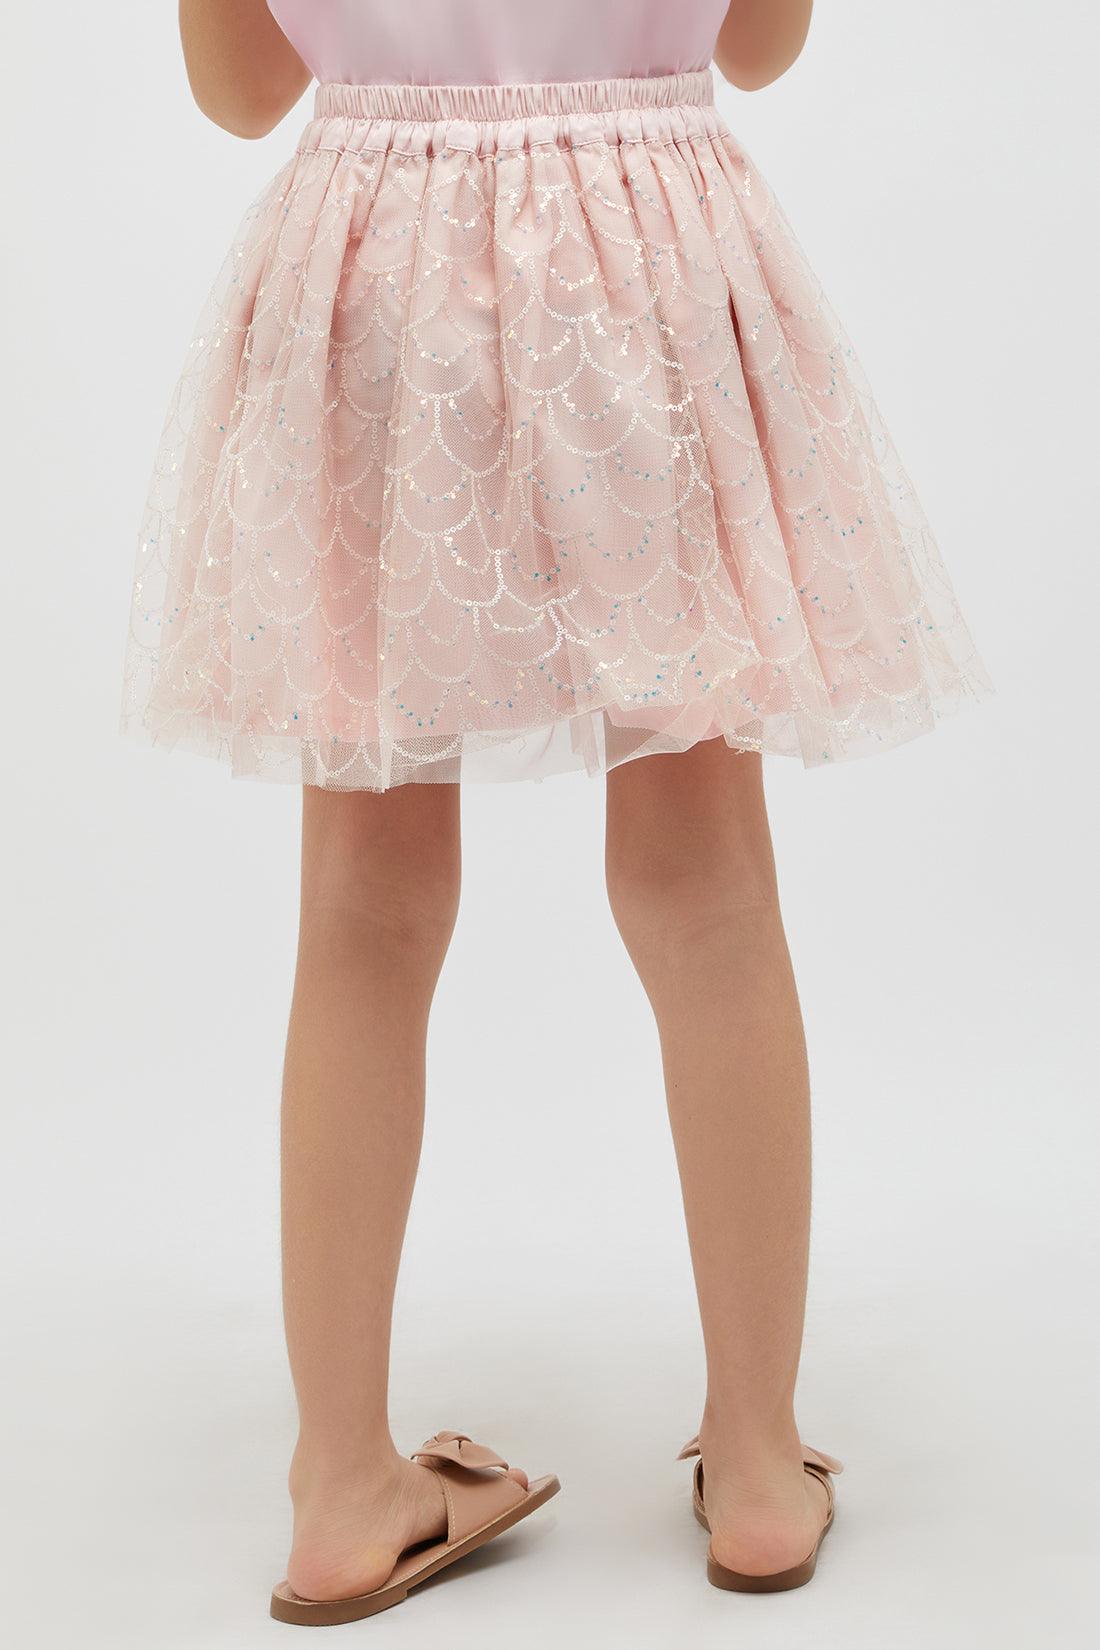 One Friday Kids Girls Princess Peach Sequin Skirt with Bow - One Friday World